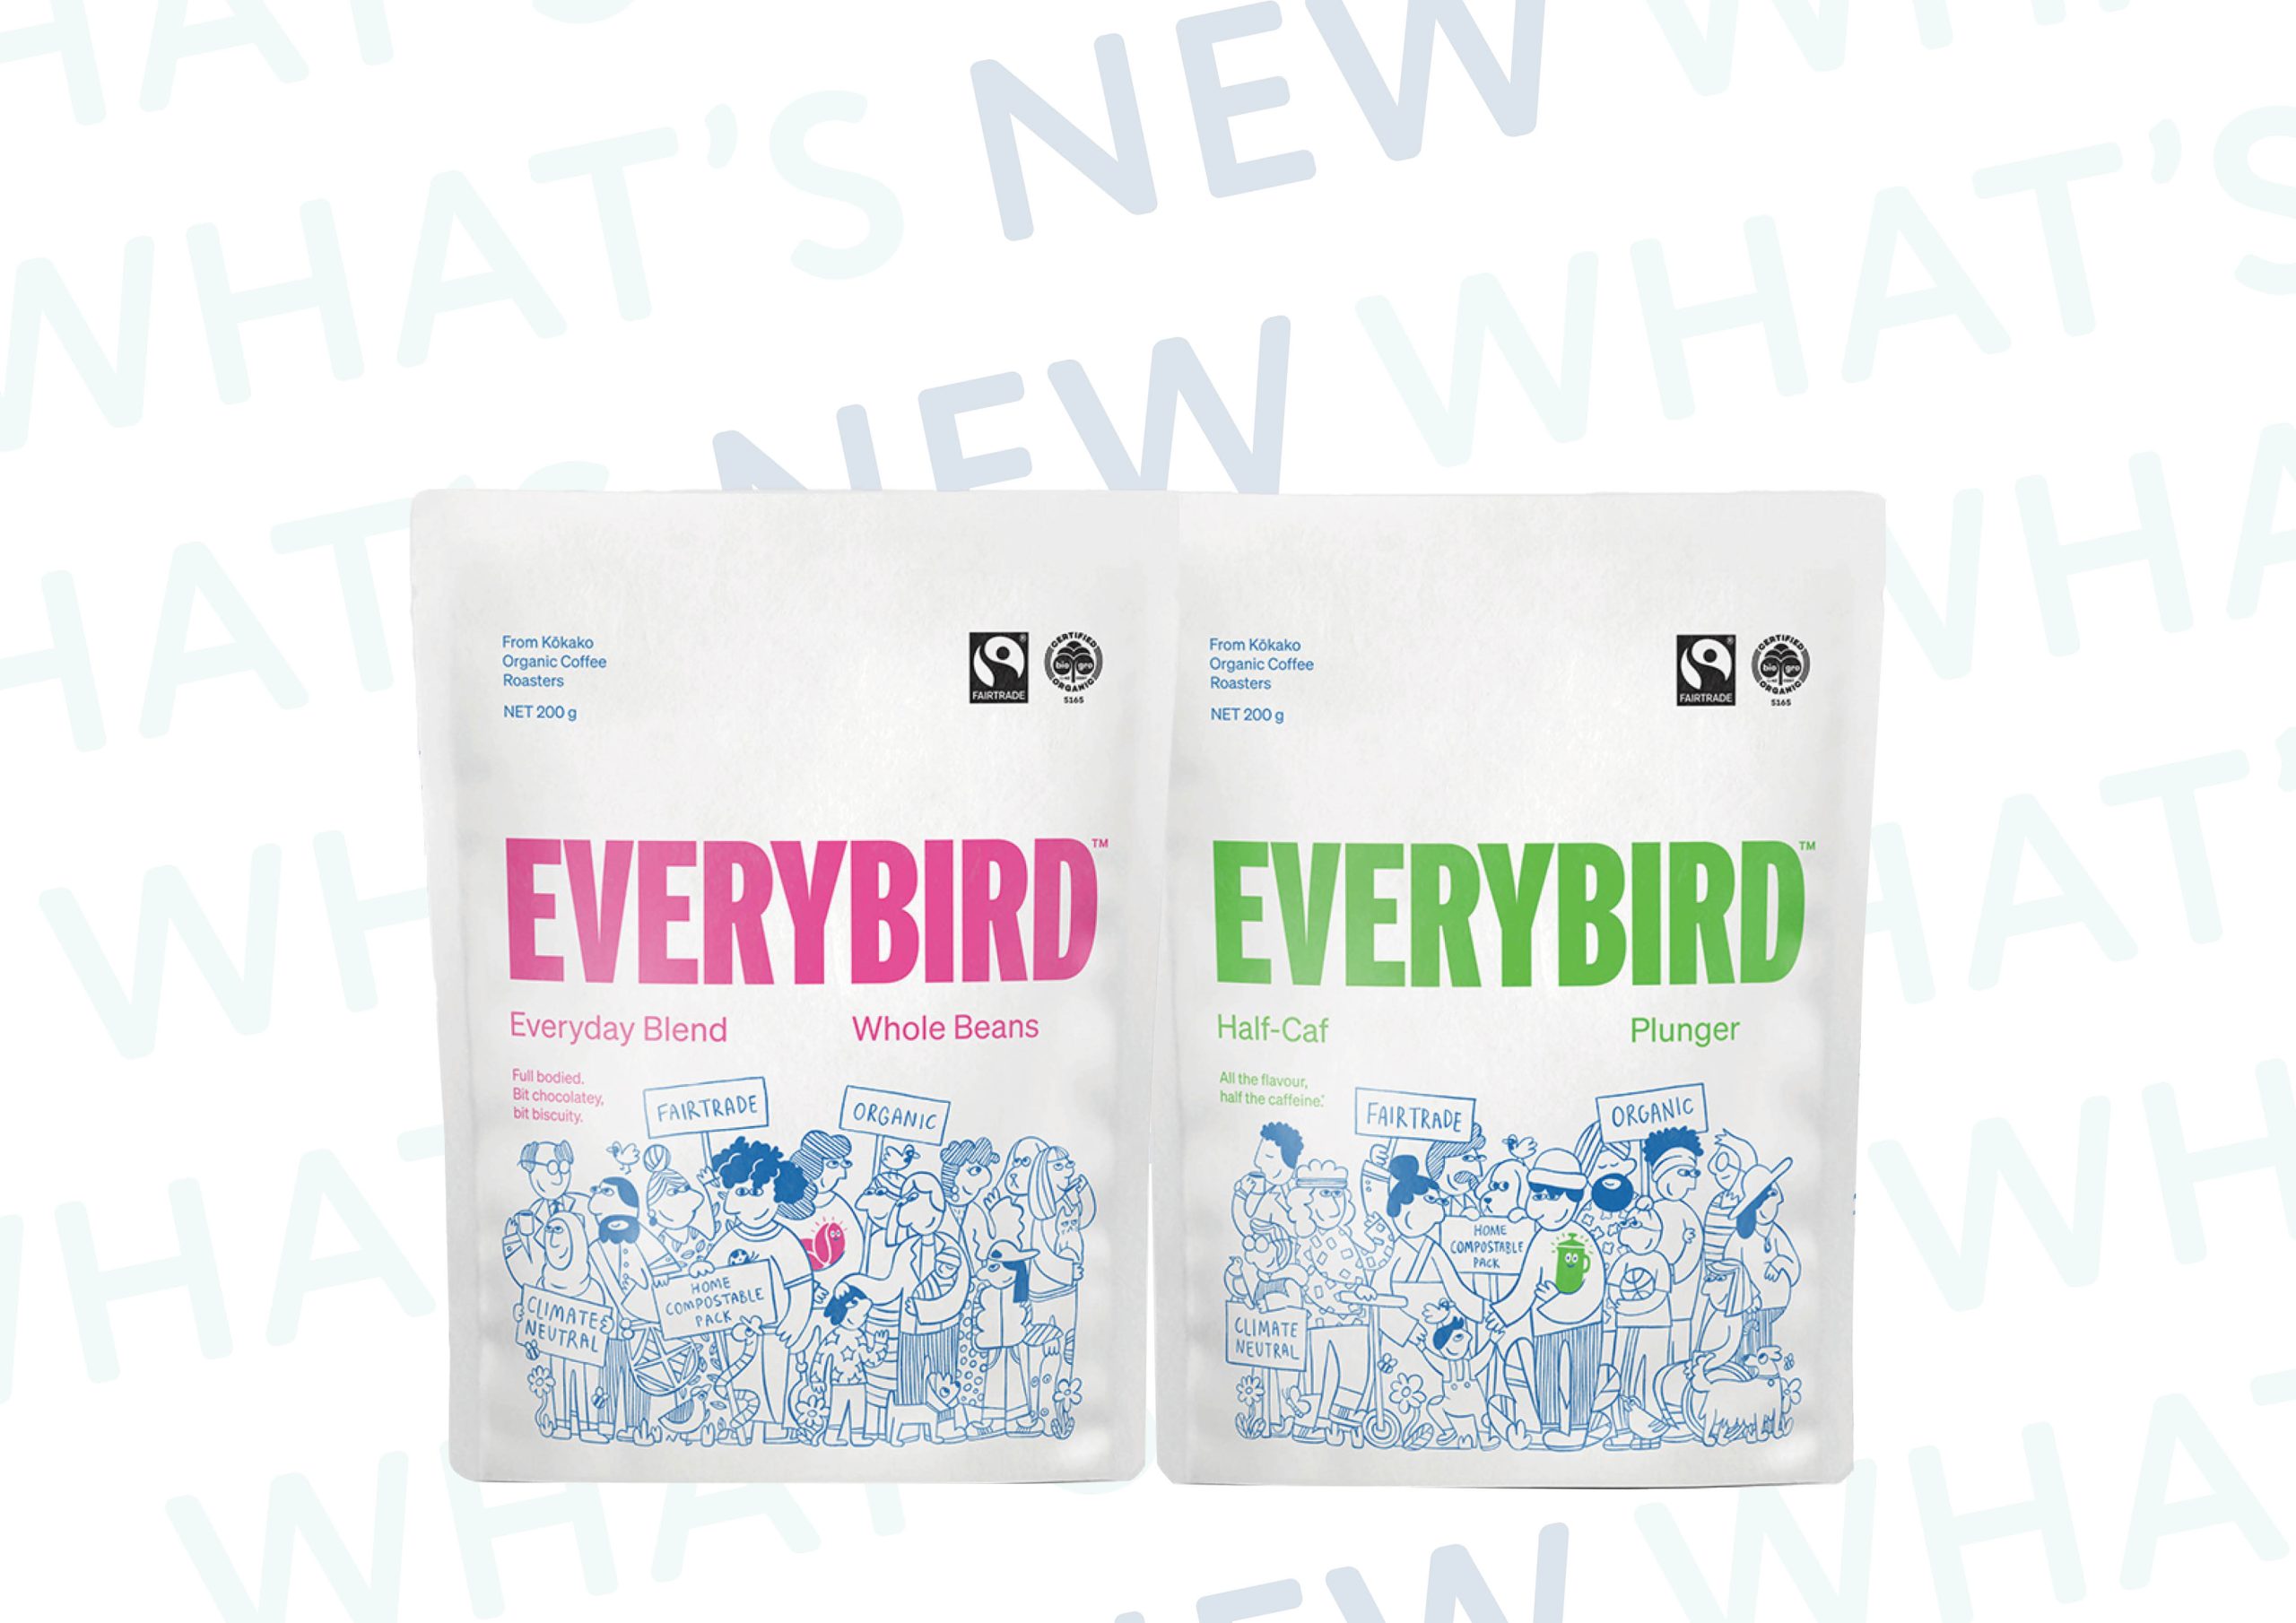 Everybird's Everyday Blend and Half-Caf packaging